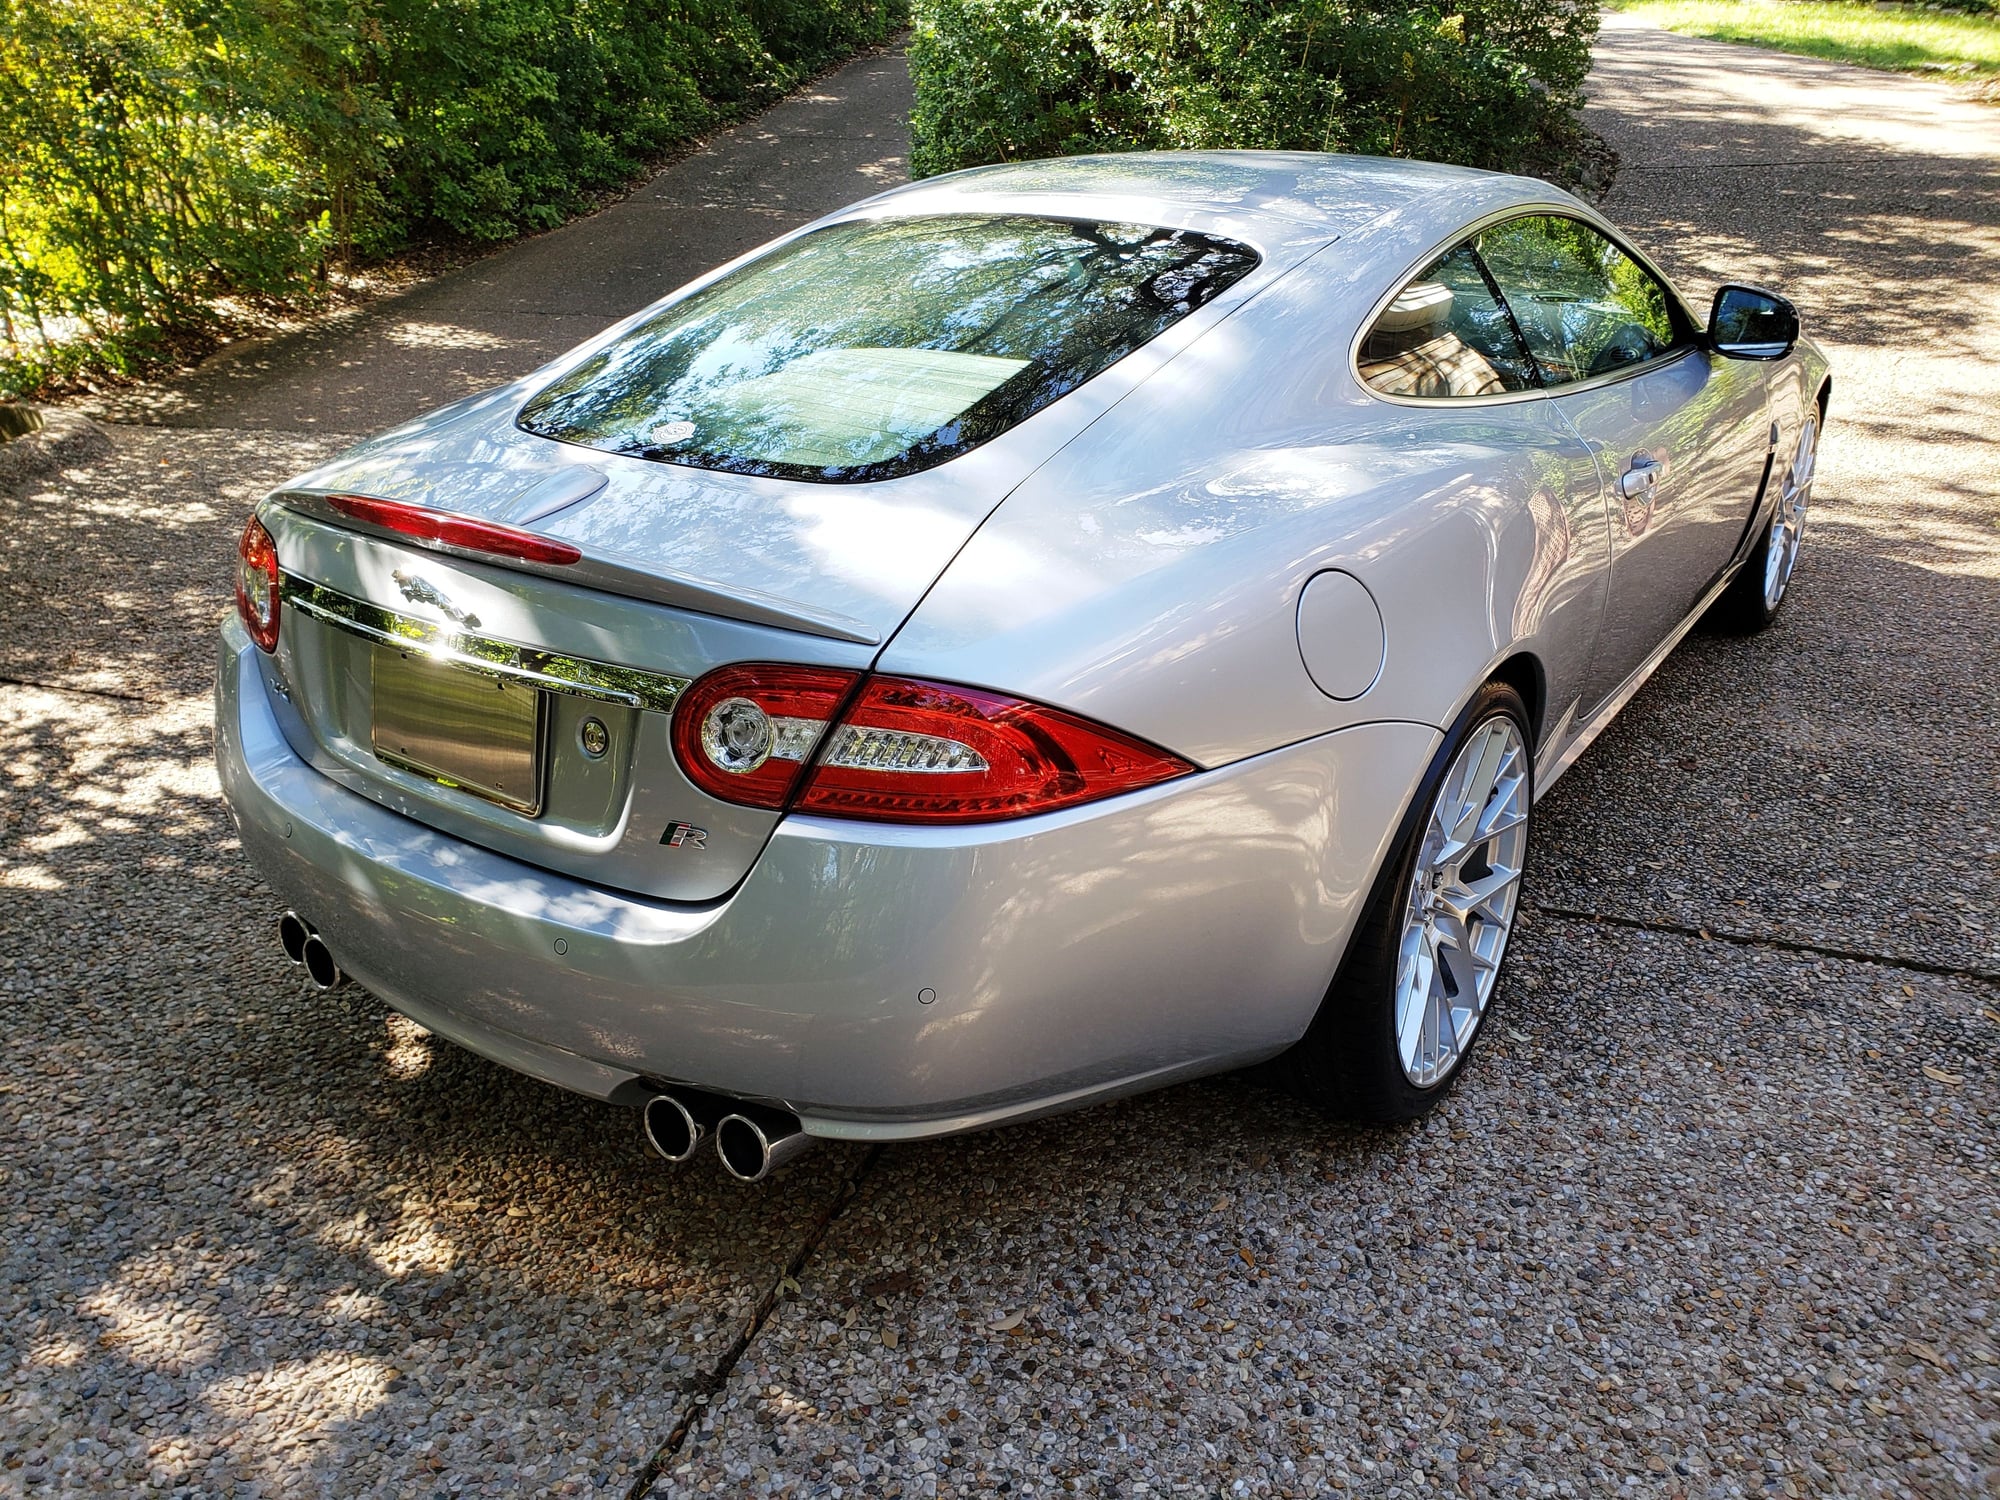 2010 Jaguar XKR - 2010 jaguar xk-r -- exceptional condition - Used - VIN SAJWA4DC4AMB37184 - 42,800 Miles - 8 cyl - 2WD - Automatic - Coupe - Silver - Austin, TX 78730, United States